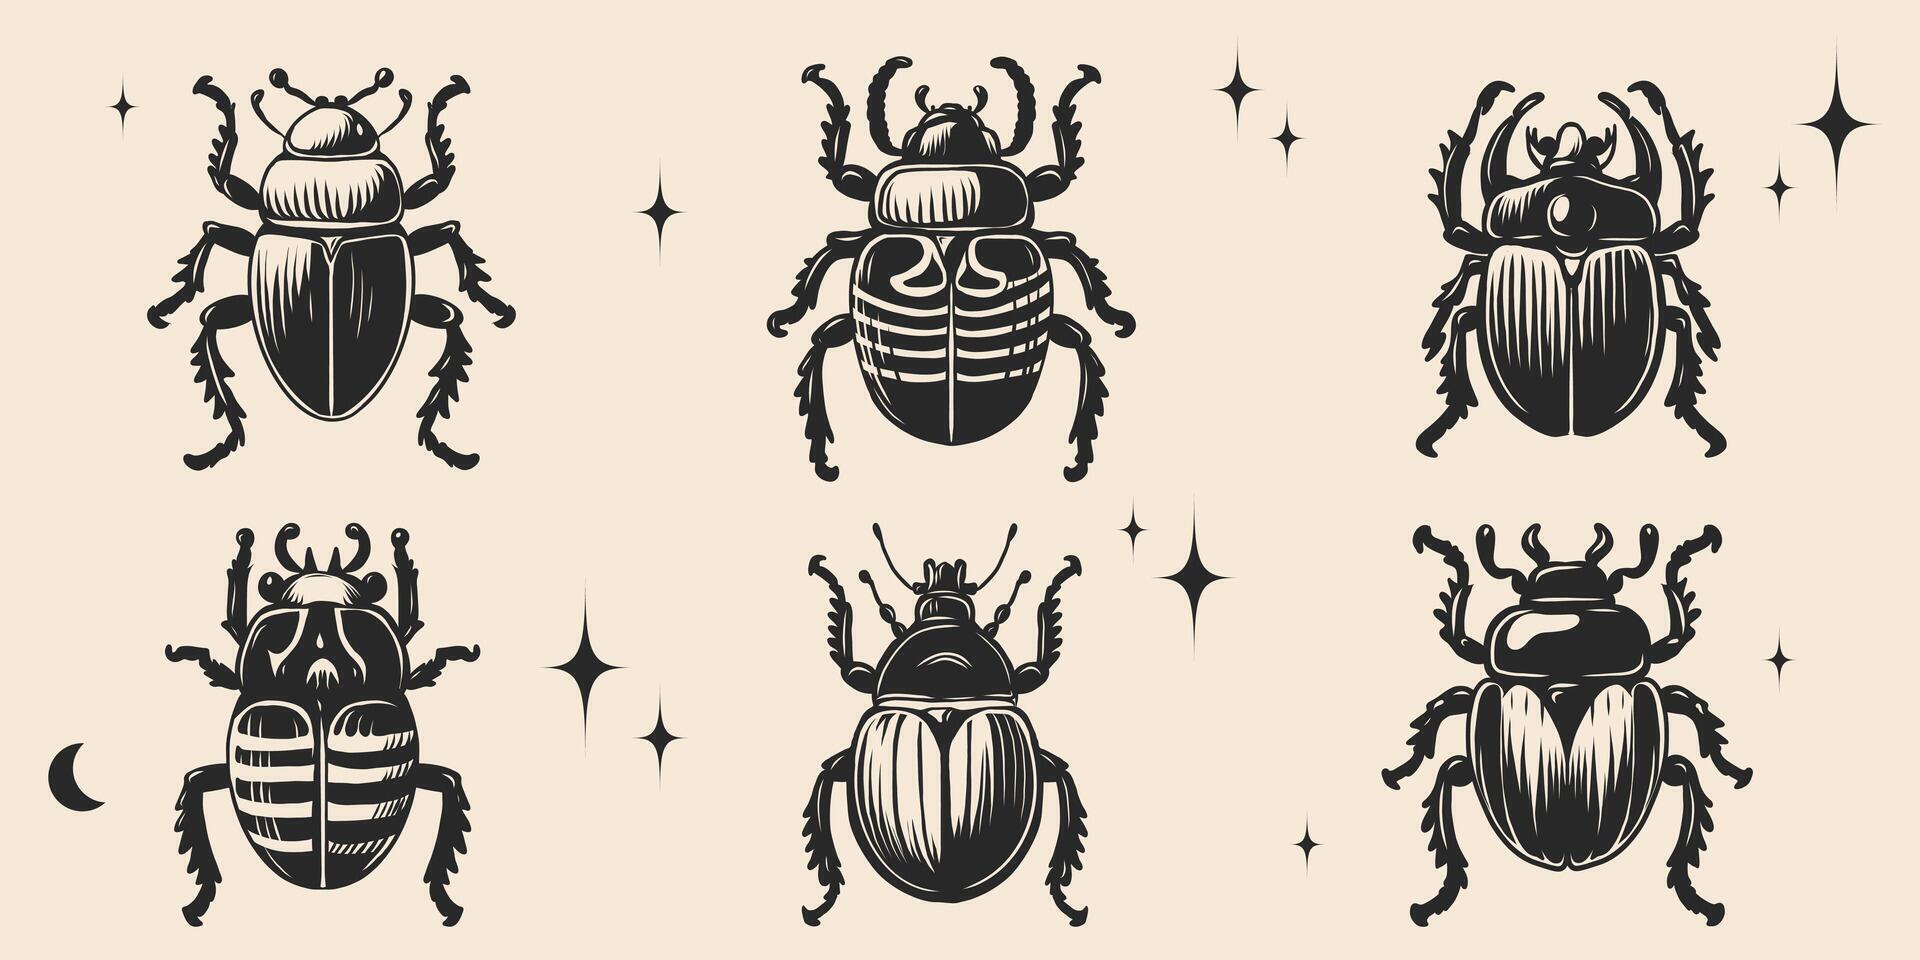 Hand drawn beetles and bugs set. Vintage y2k tattoo ink style, realistic engraving. Decorative insect graphic Isolated on background for print, tattoo, poster, card. Monochrome vector